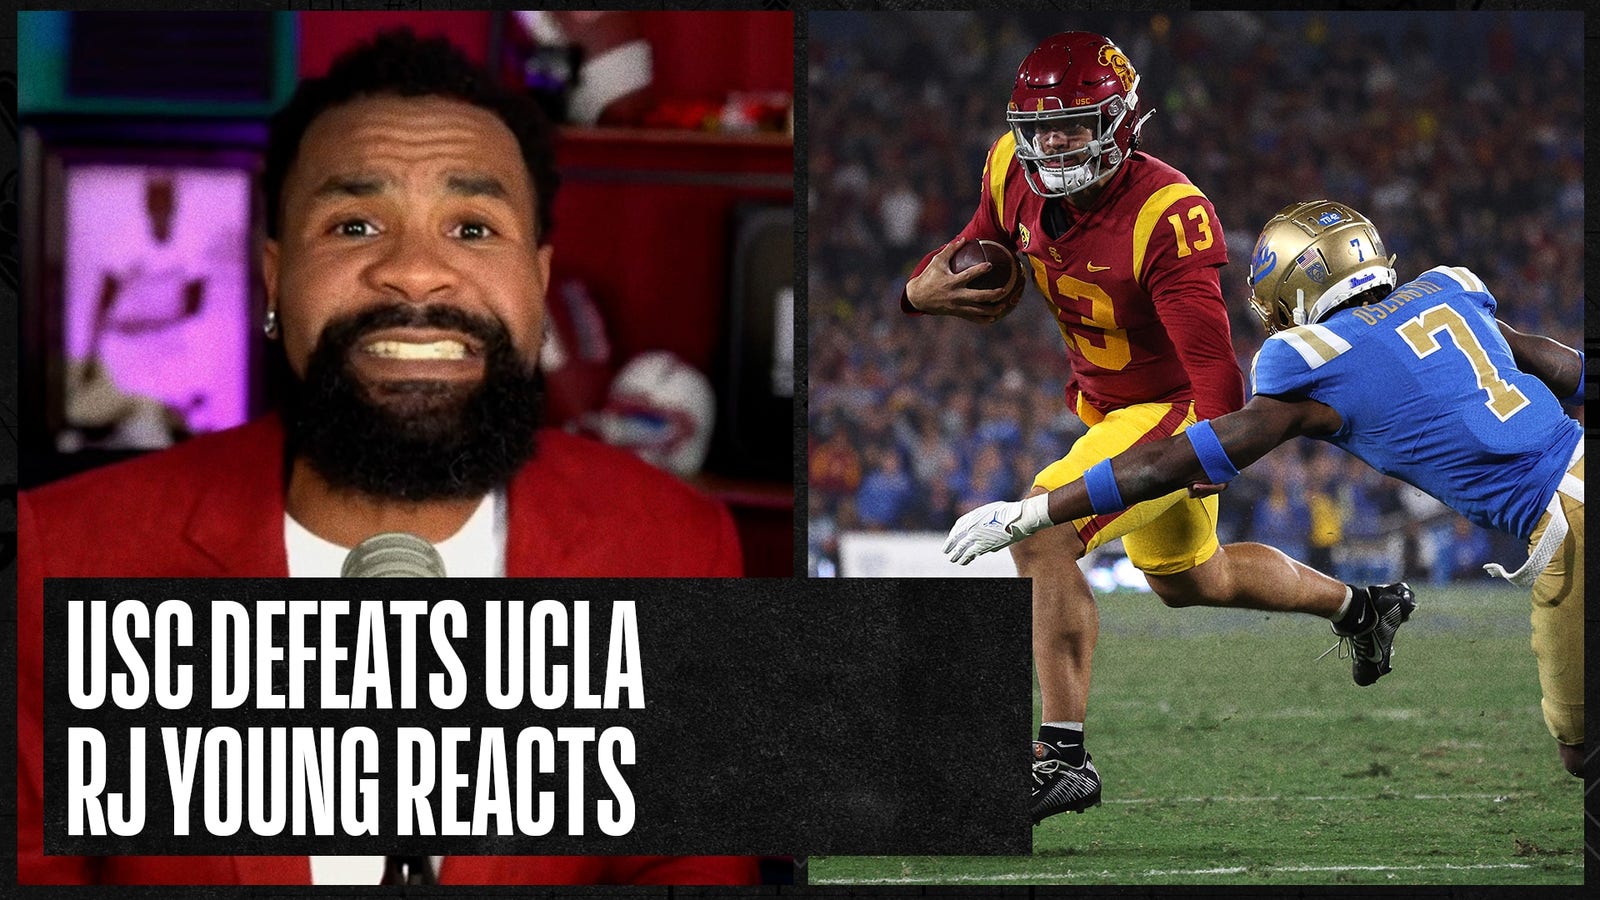 USC wins a wild one against UCLA